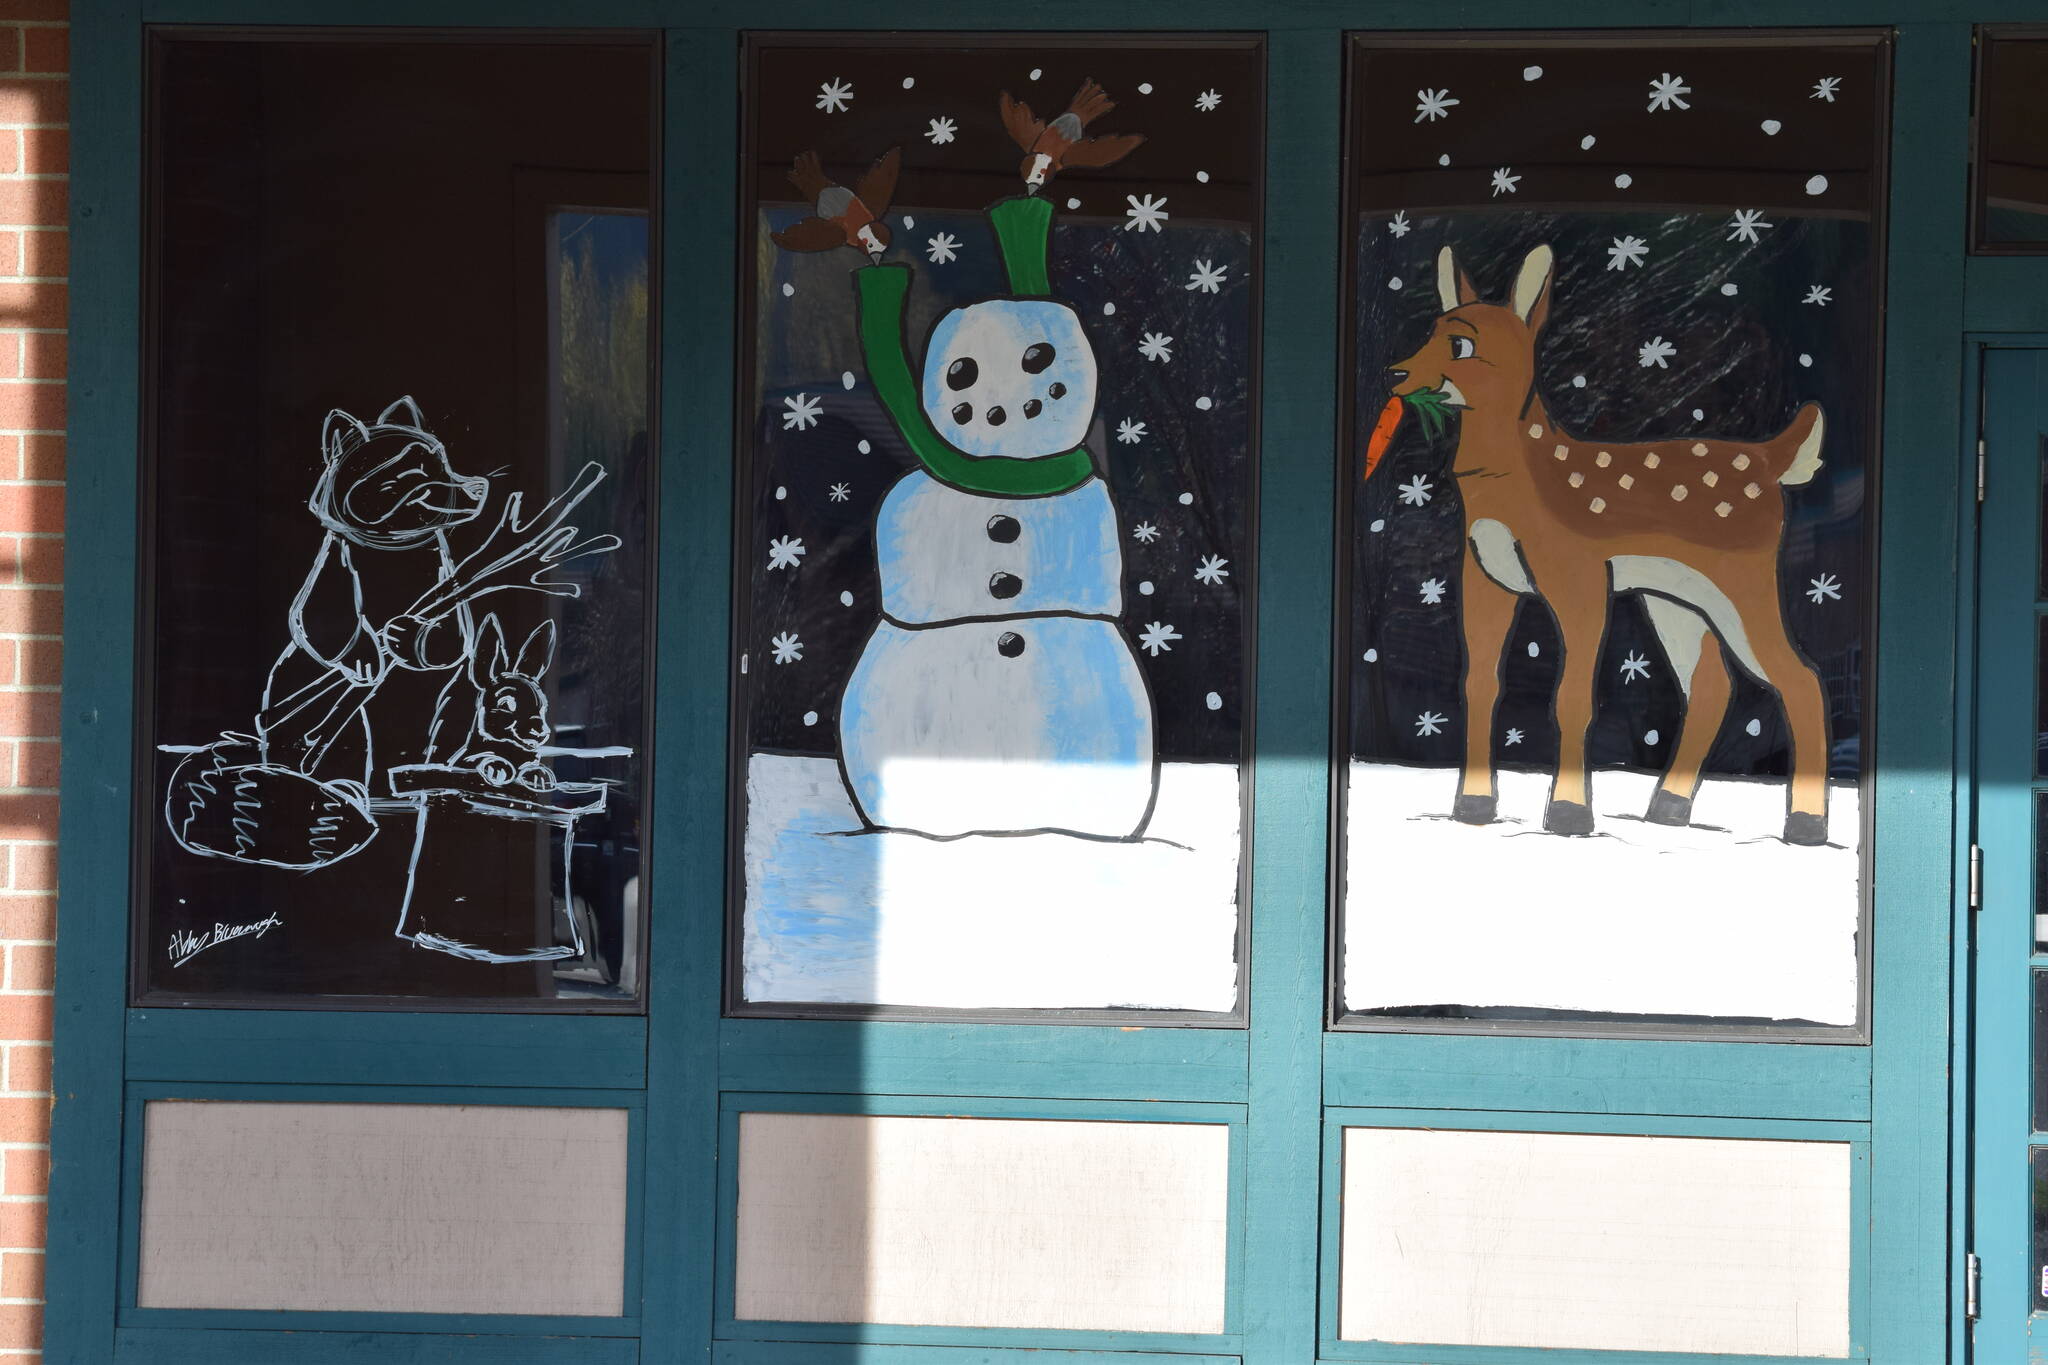 Windows at at North Bend Outlet Mall painted as part of the Holiday Window Painting Contest organized by North Bend Art Industry. Pictured: Artwork by Abby Brunaugh. Photos Conor Wilson/Valley Record.